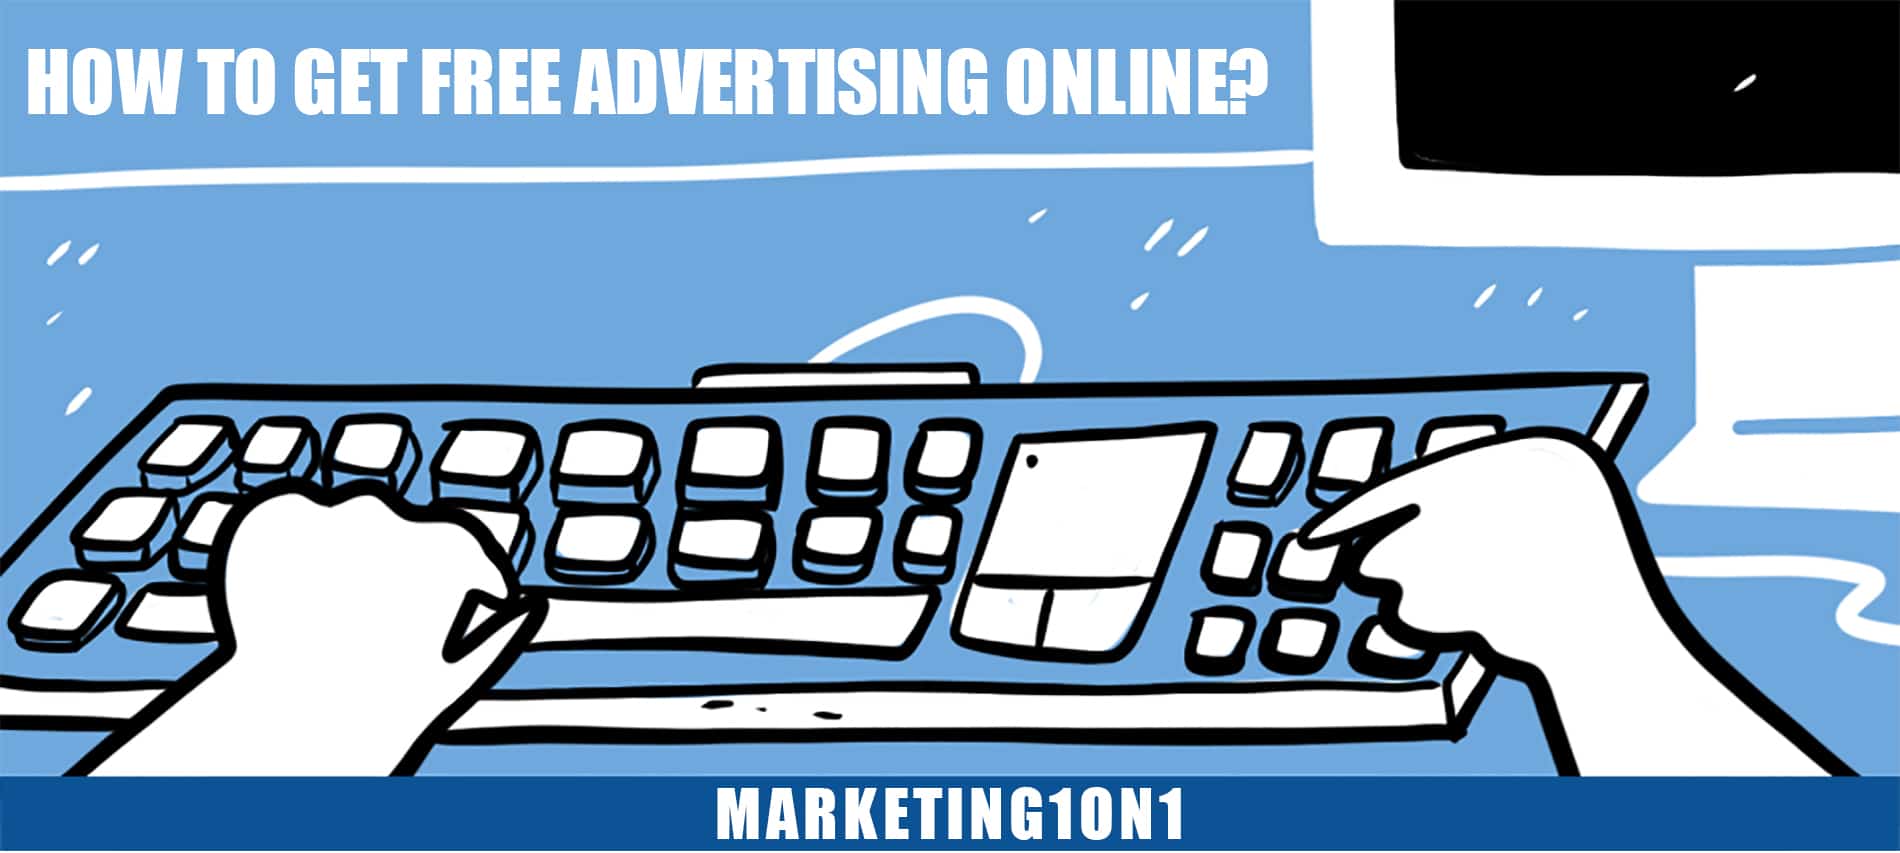 How to get free advertising online?